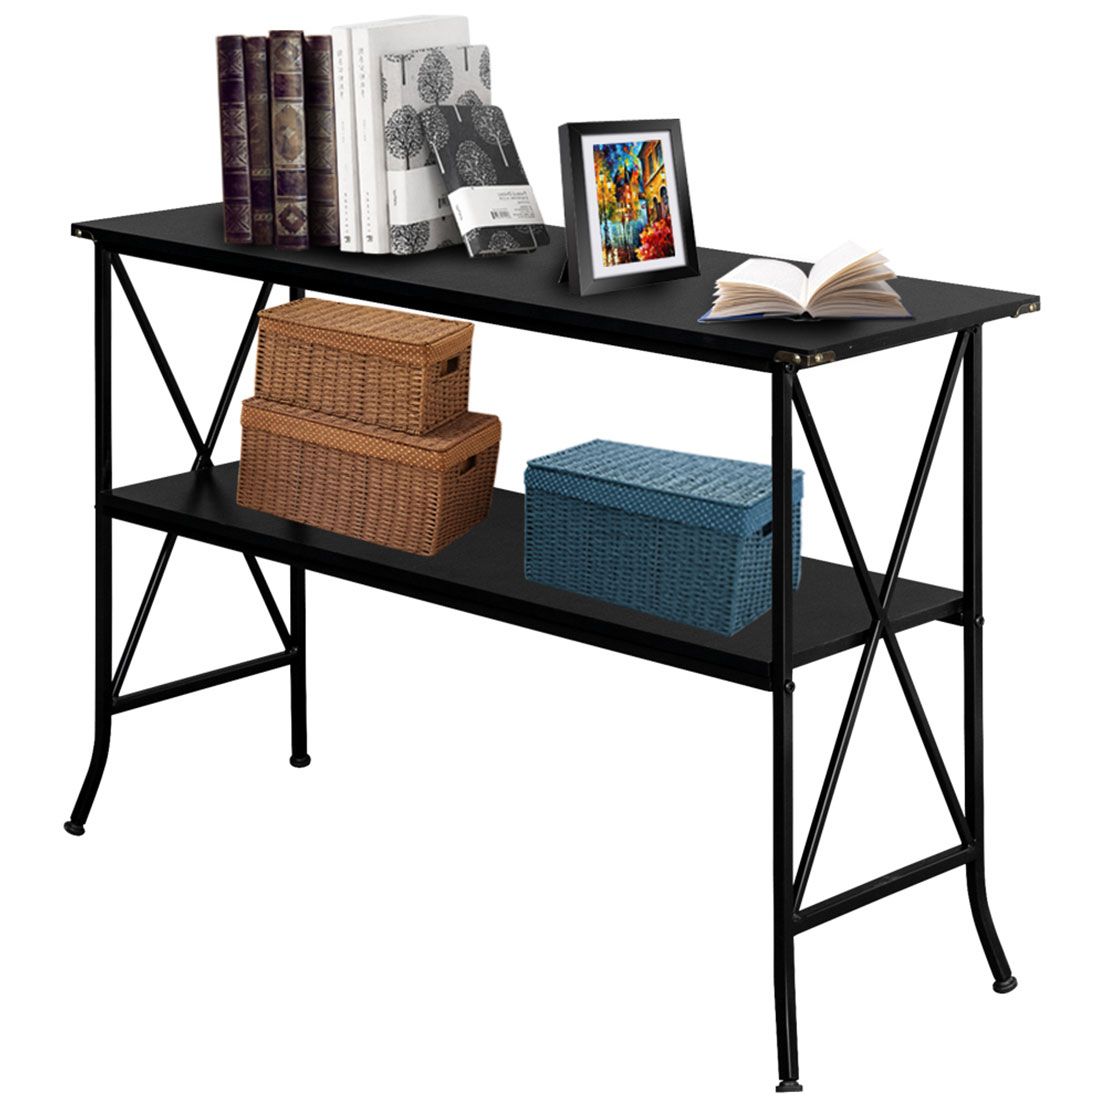 Robot Gxg Black Mdf Countertop Black Wrought Iron Base 2 Layers Console Throughout Aged Black Console Tables (View 9 of 20)